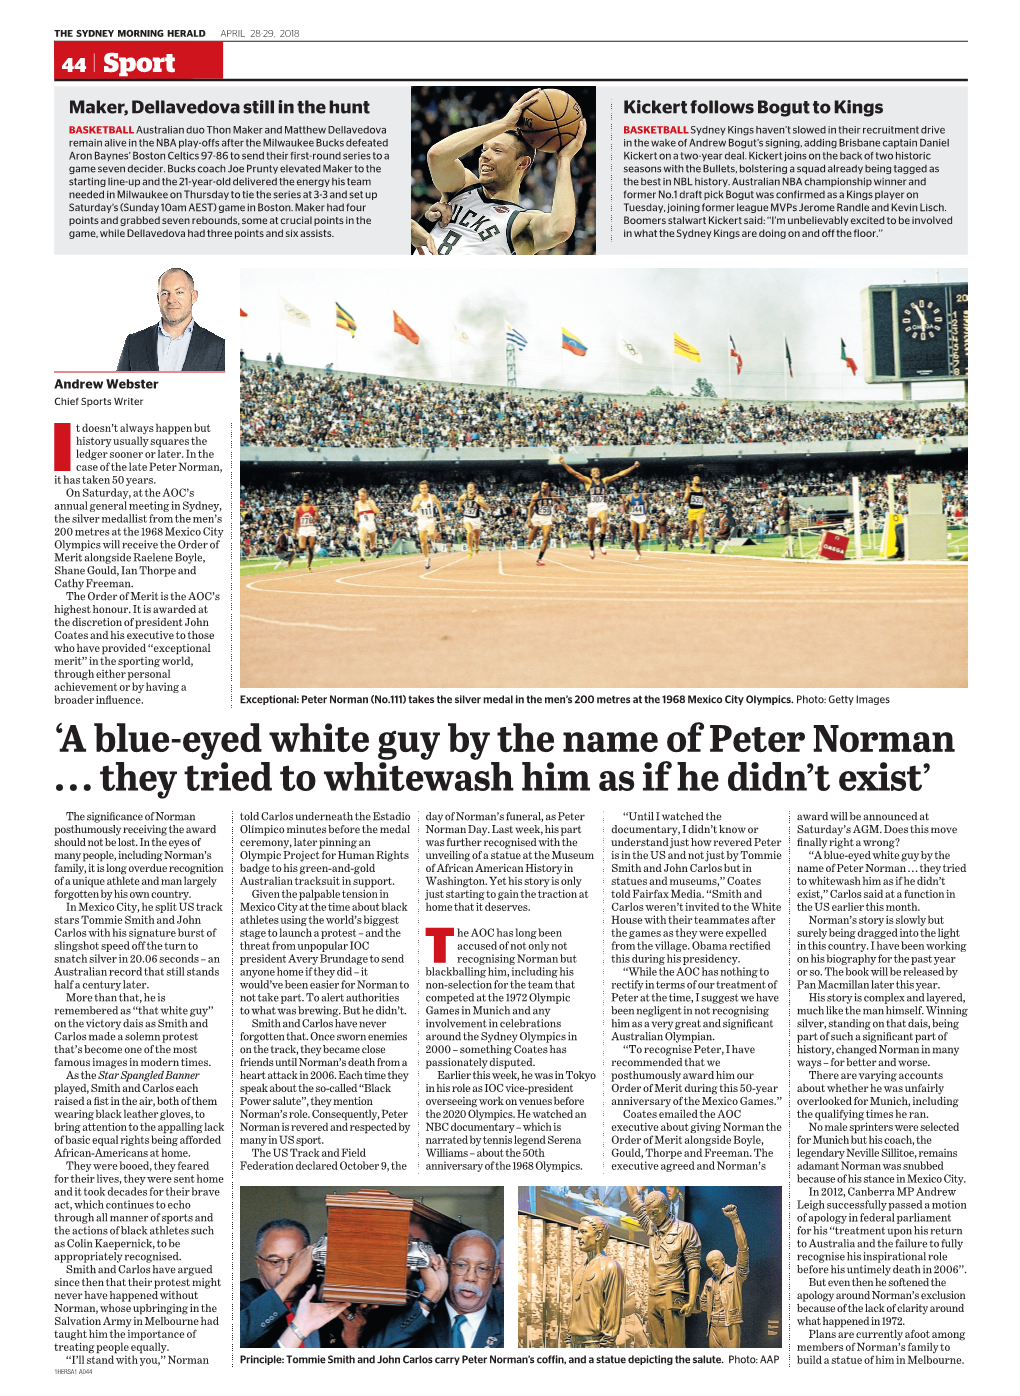 'A Blue-Eyed White Guy by the Name of Peter Norman ... They Tried To